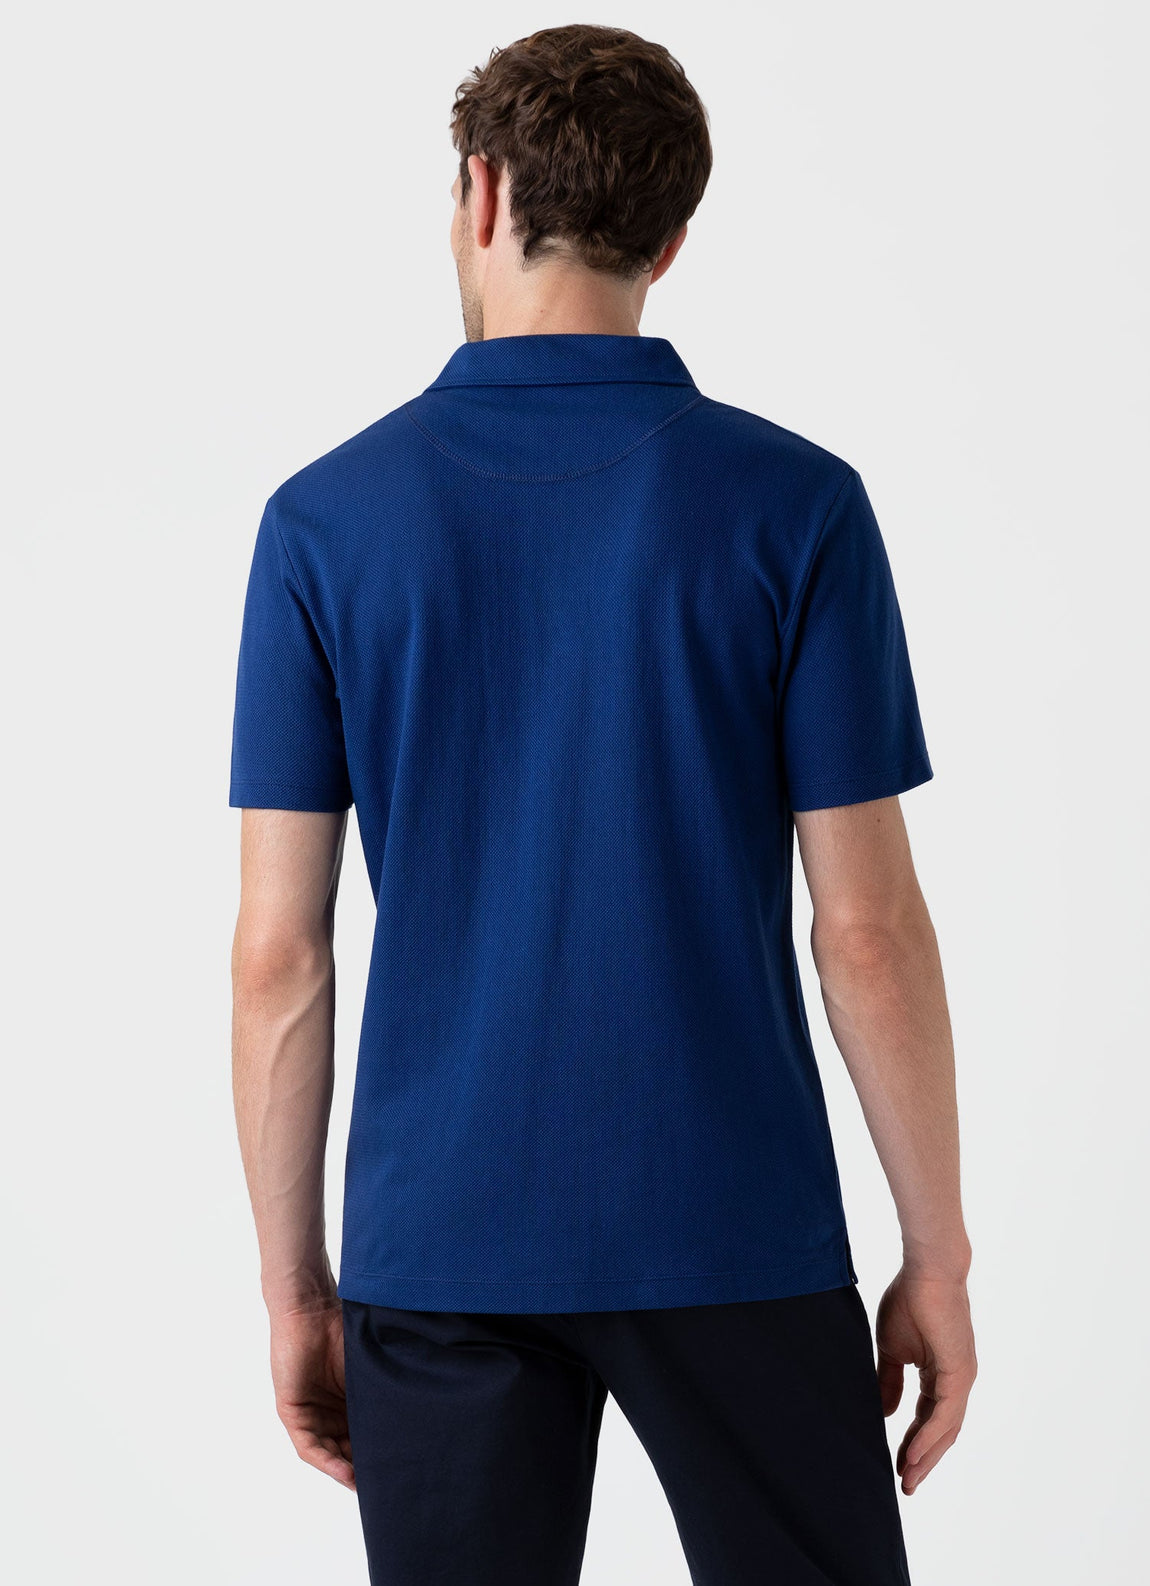 Men's Riviera Polo Shirt in Space Blue